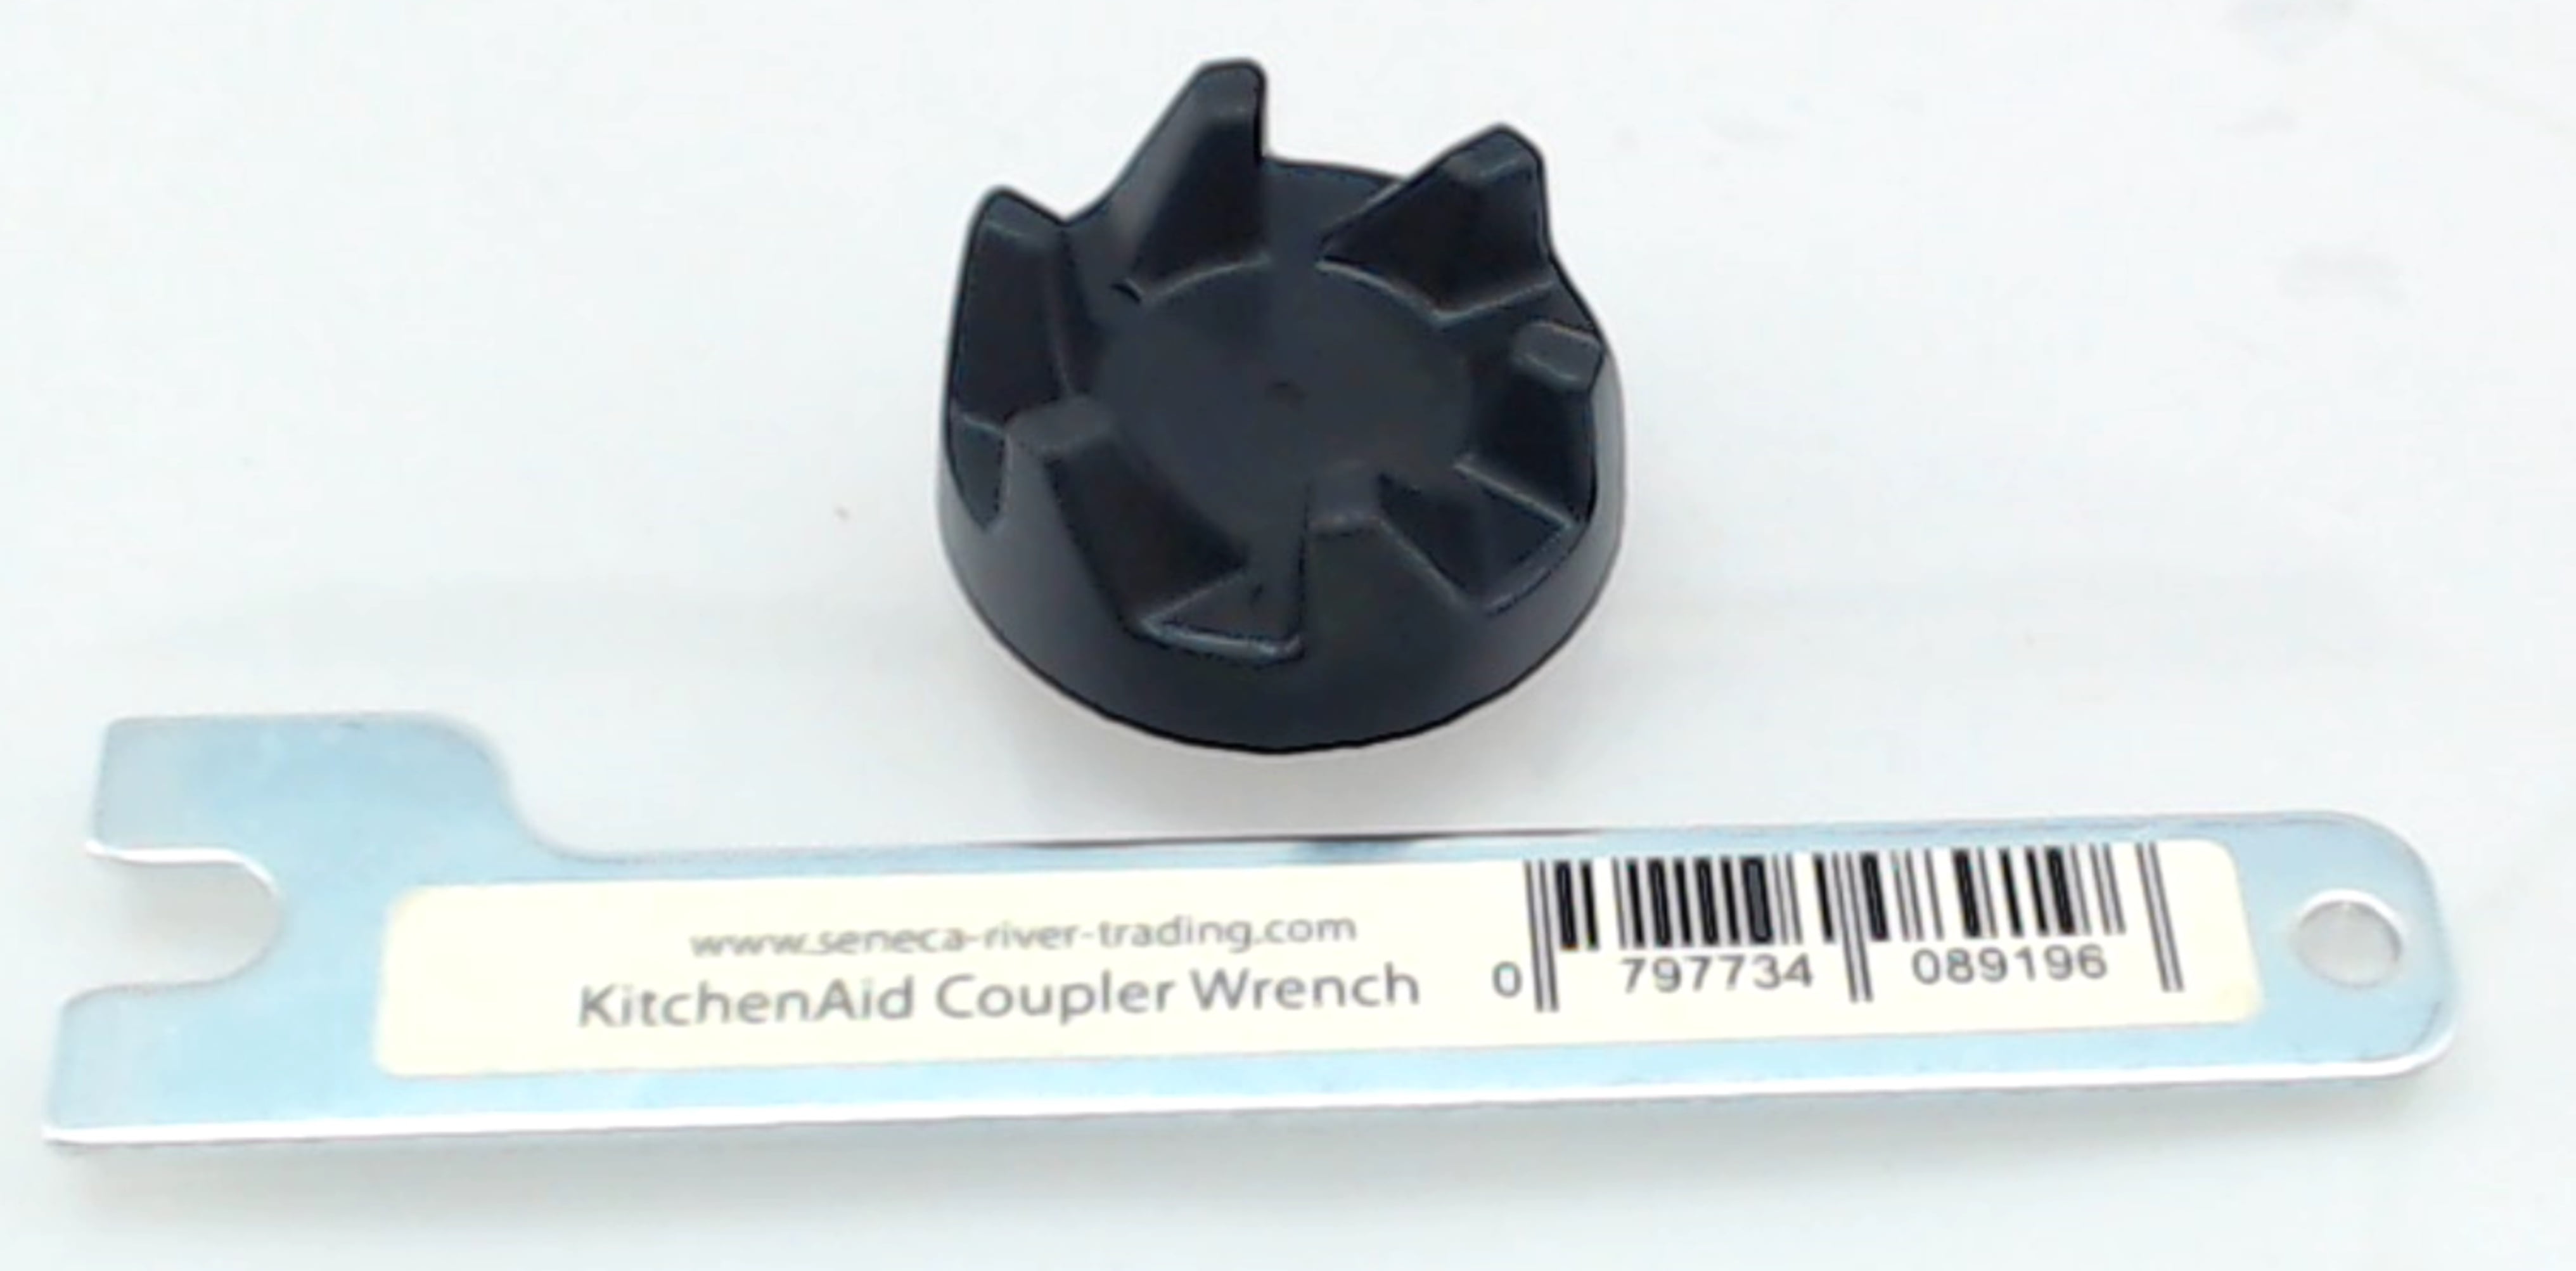 1Pc Rubber Clutch Coupler Coupling Replace Gear For Kitchenaid 9704230 HU 